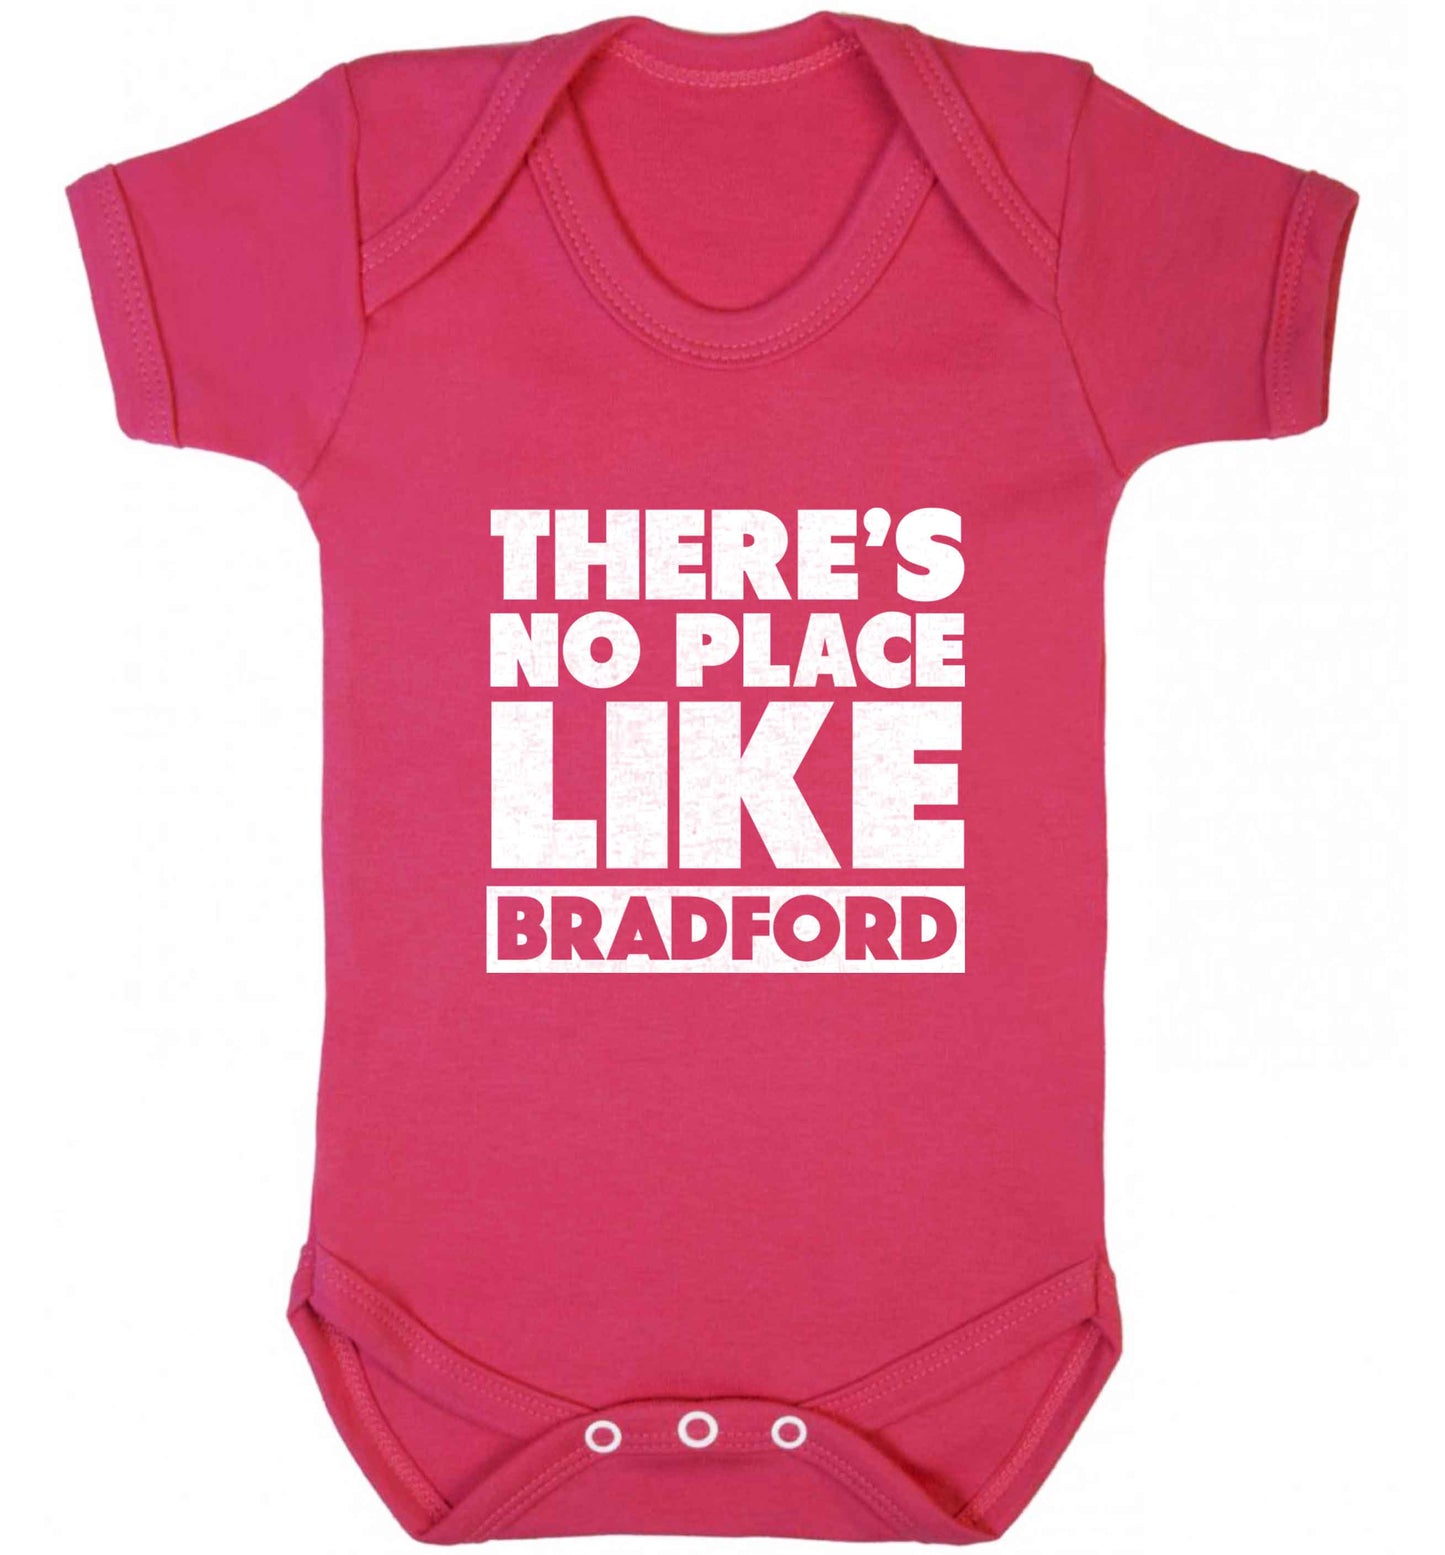 There's no place like Bradford baby vest dark pink 18-24 months